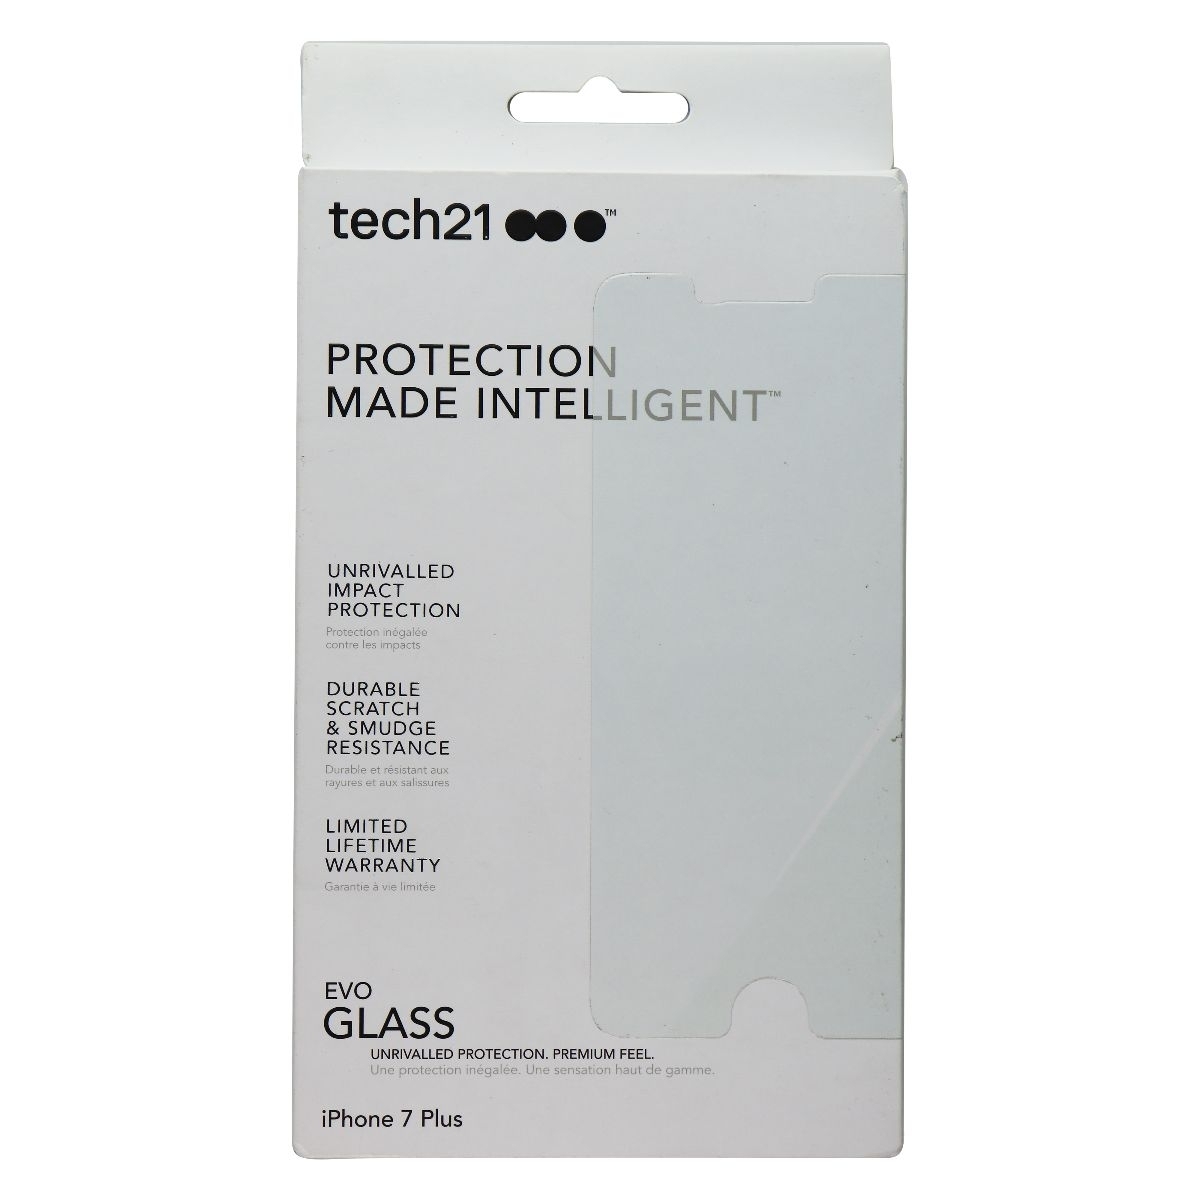 Tech21 Evo Glass Series Tempered Glass For Apple IPhone 7 Plus - Clear (Refurbished)